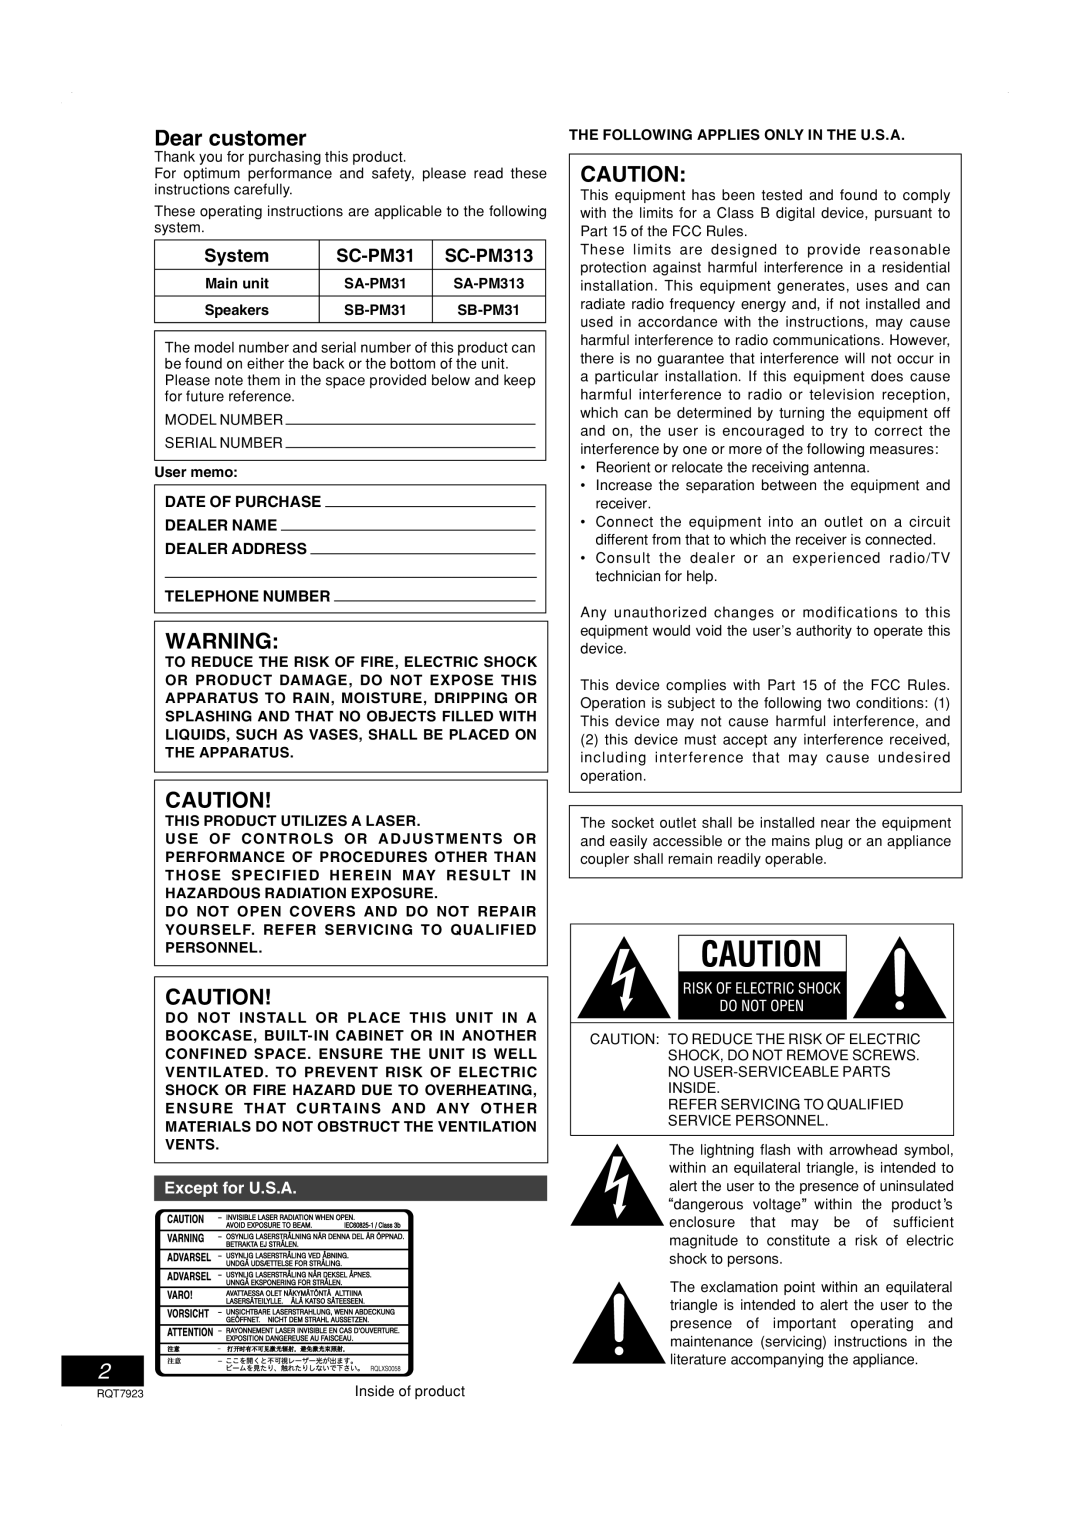 Panasonic important safety instructions System, SC-PM313, Except for U.S.A 